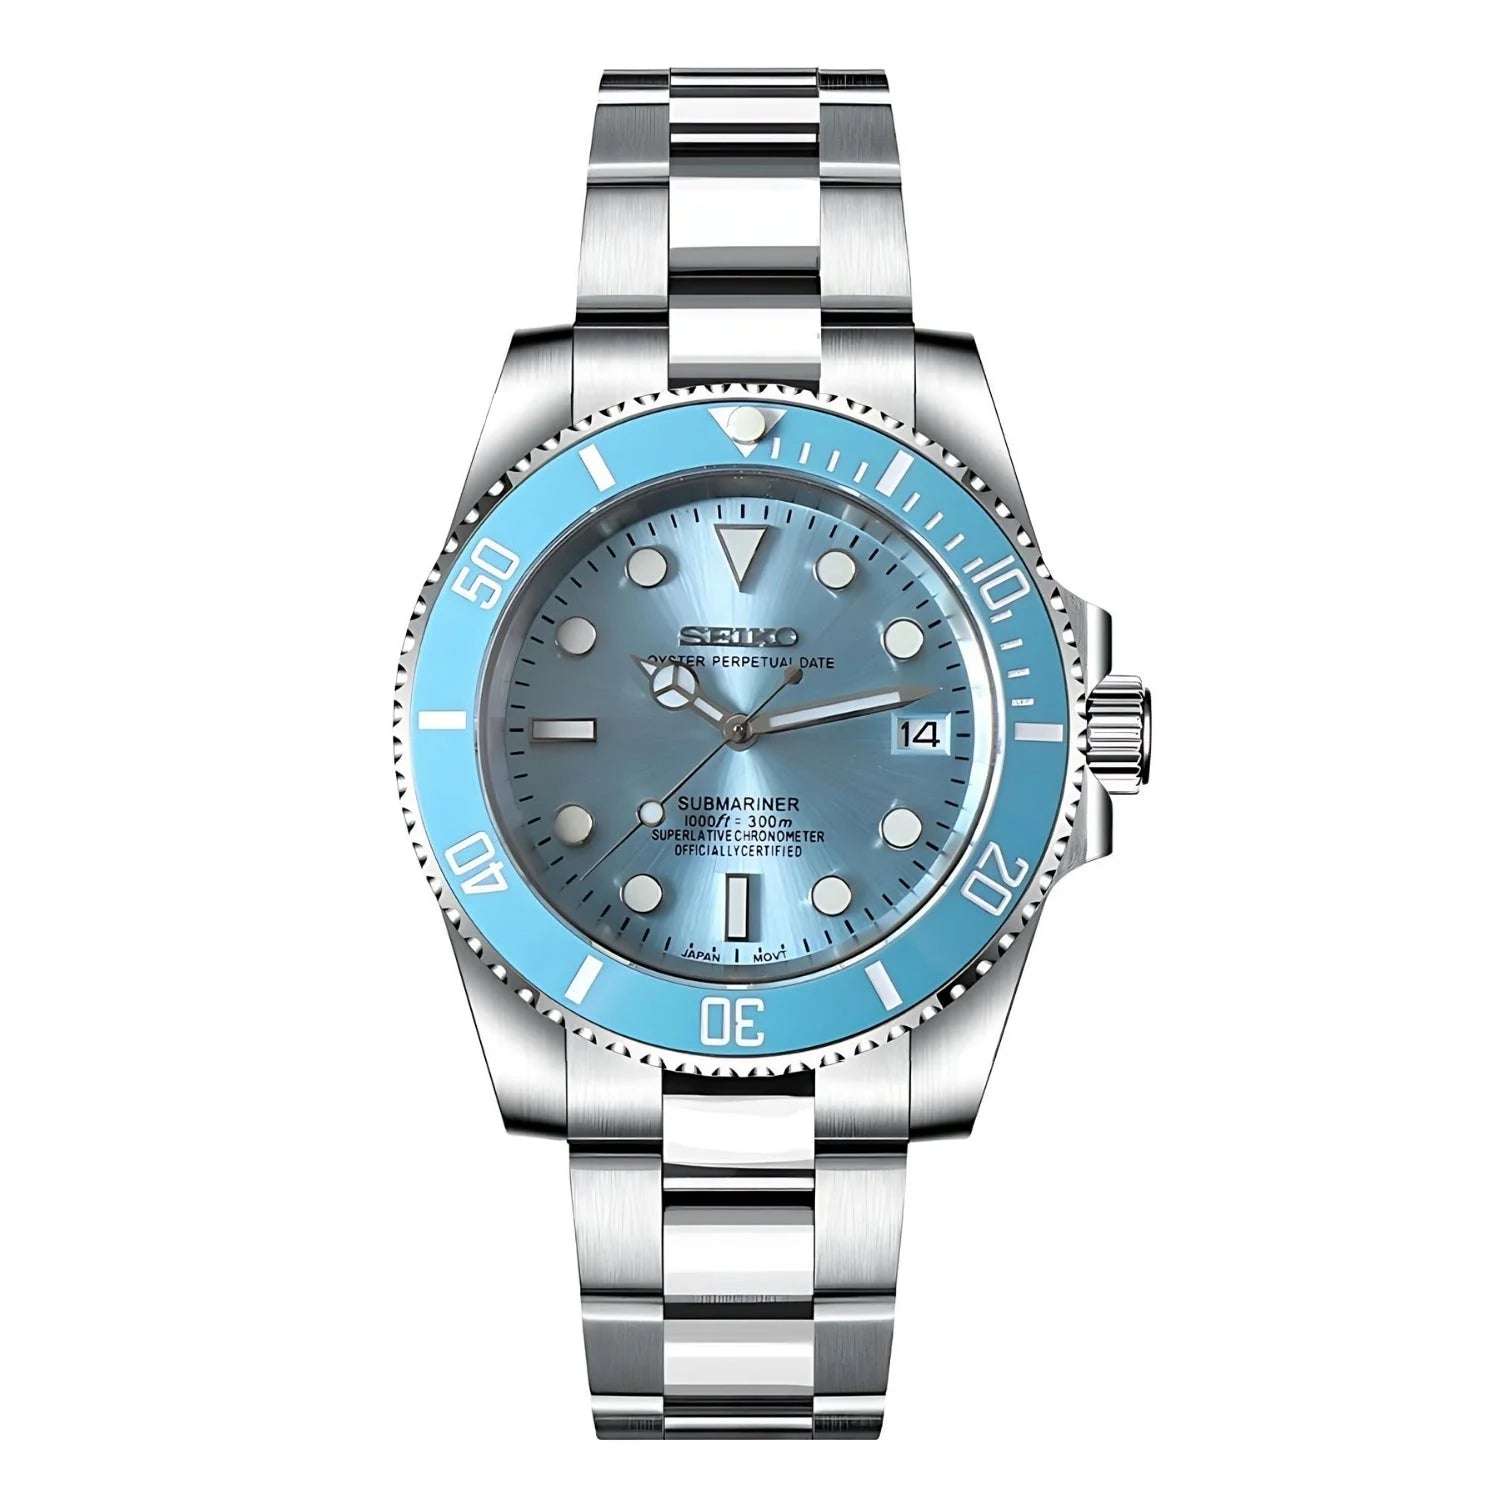 Seikomariner Light Blue Stainless Steel Submariner Watch With a Light Blue Bezel And Dial